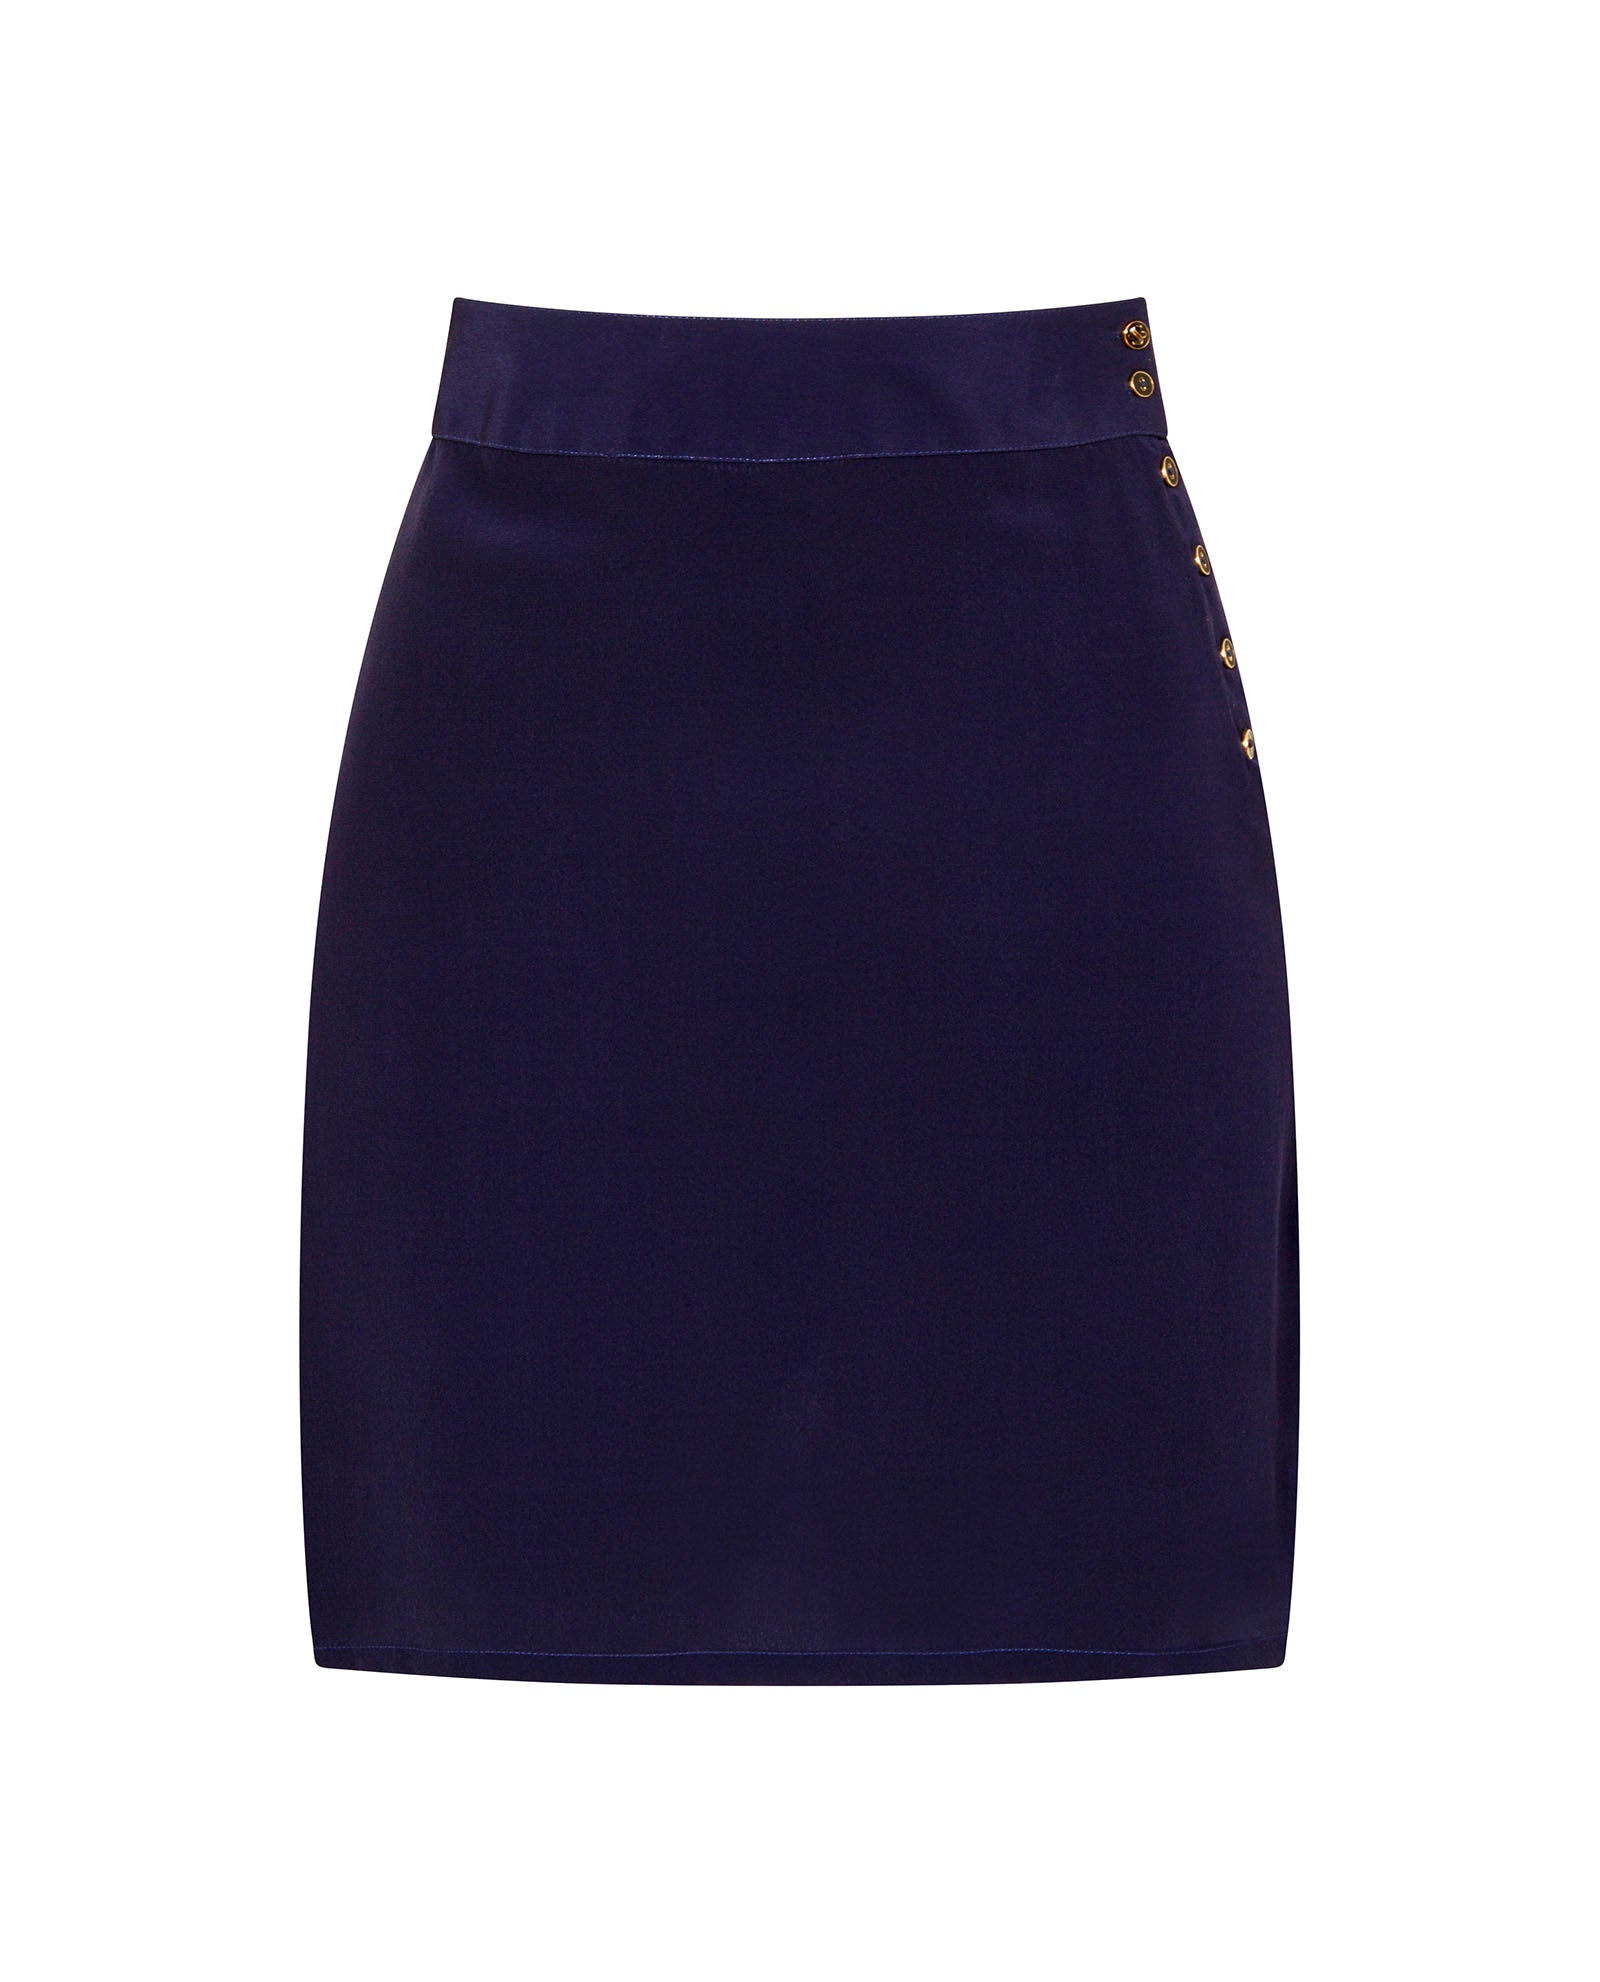 Why Navy Blue Skirts are a Must-Have